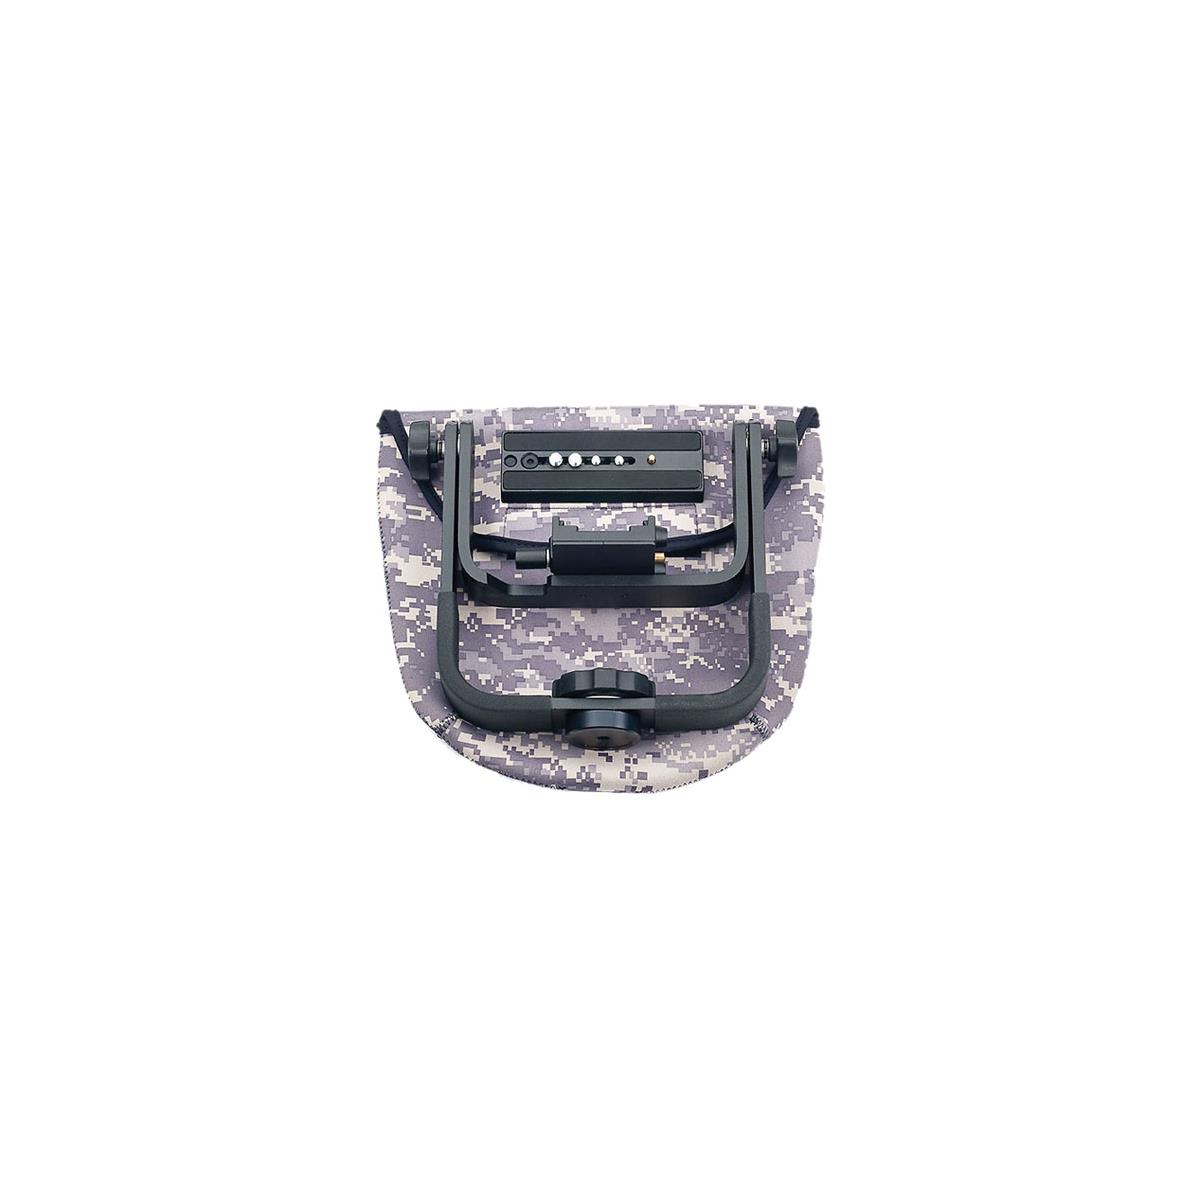 LensCoat Manfroto 393 Gimbal Pouch - Army Digital Camo -  LCMGPDC